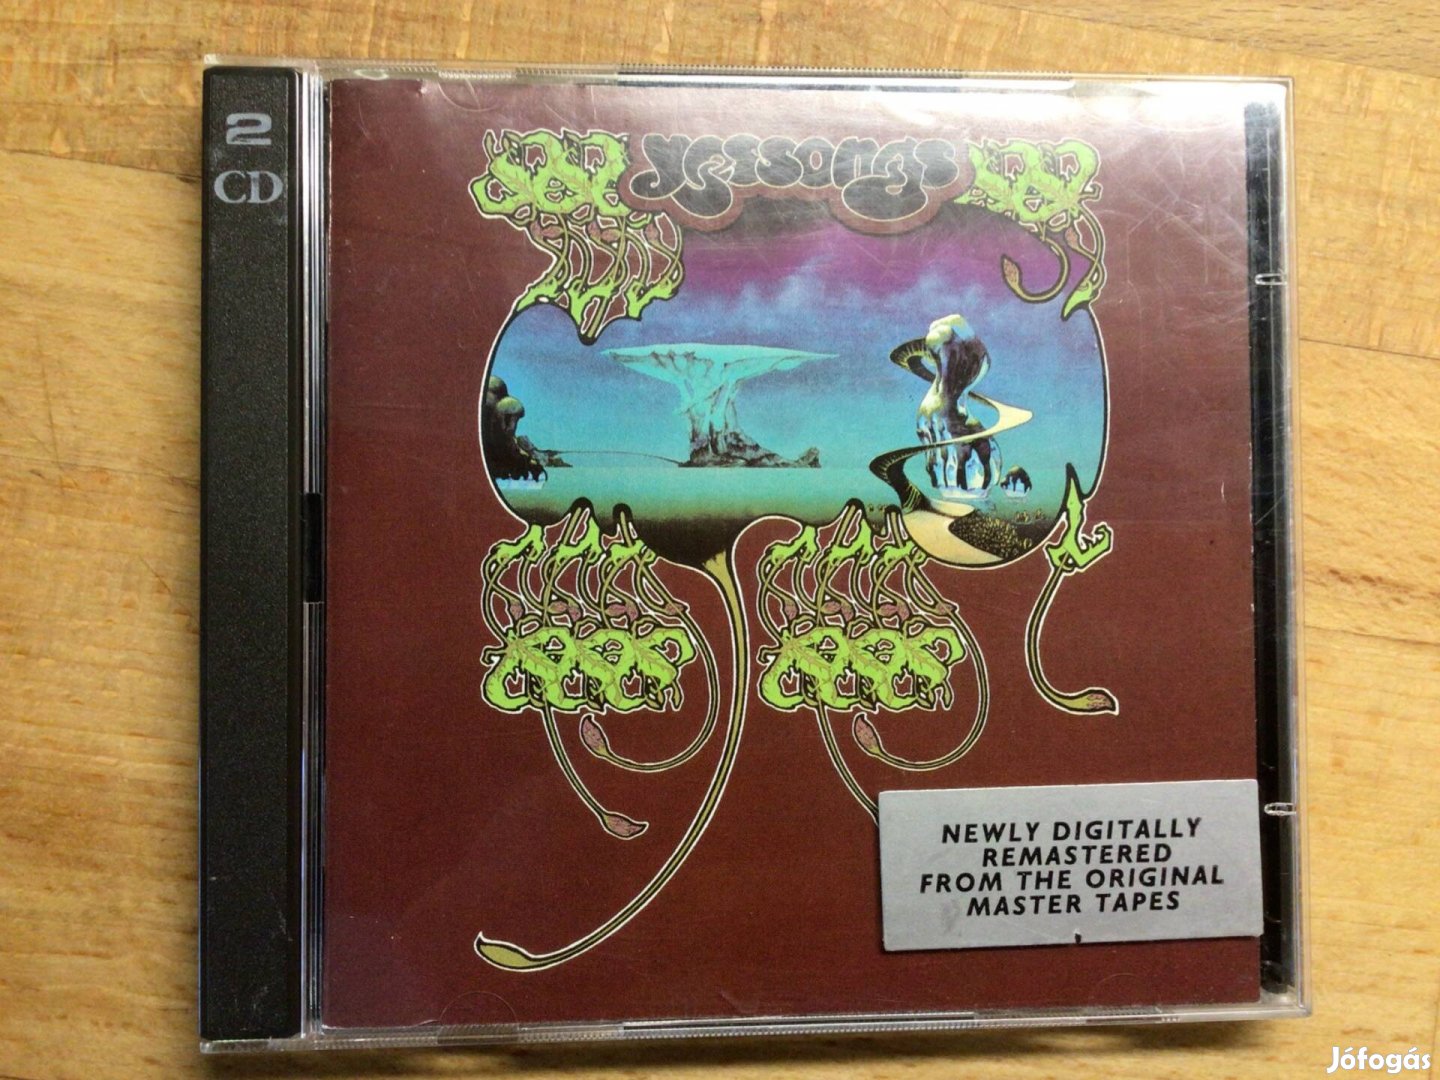 Yes- Yessongs, cd dupla album